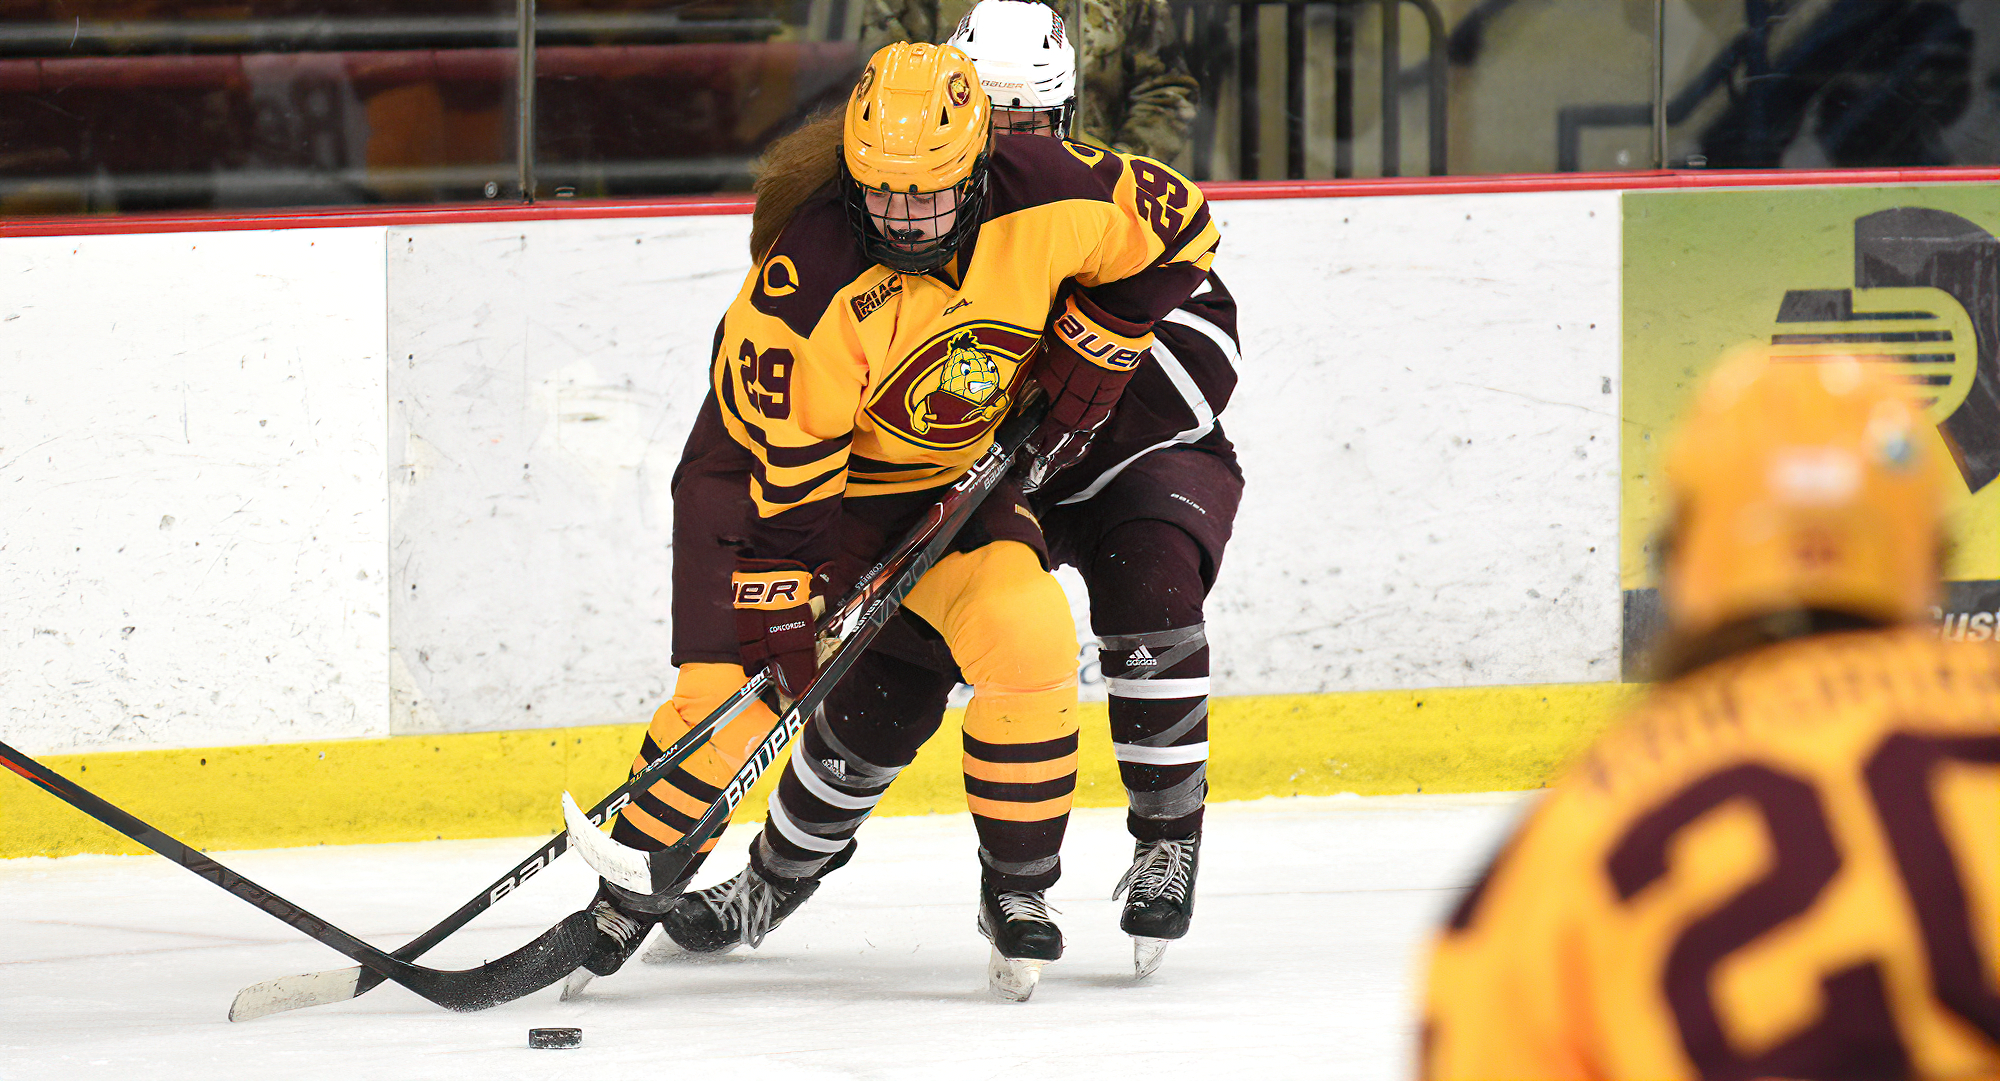 Jerica Friese controls the puck against an Augsburg defender. She scored the lone goal for the Cobbers in the series opener with the Auggies.